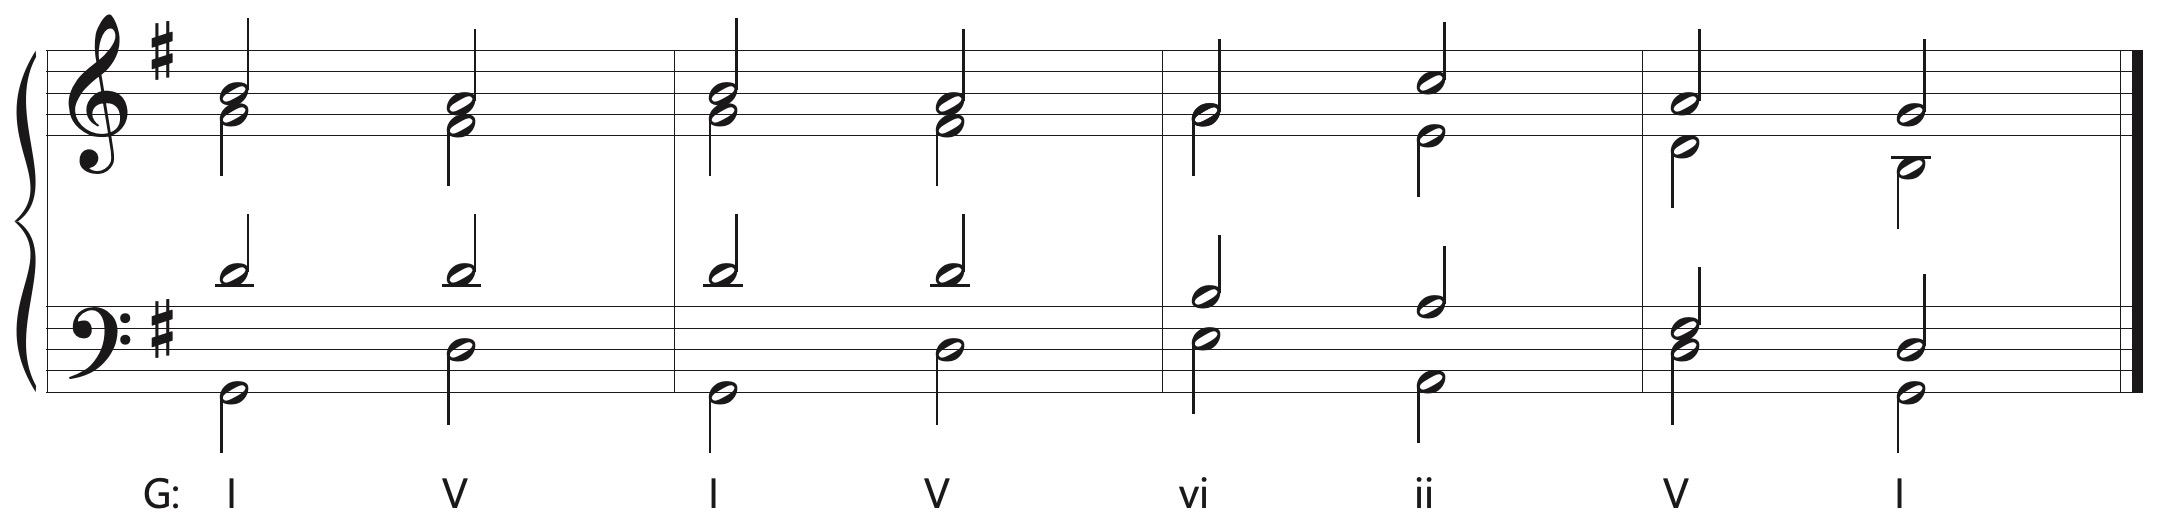 root position part writing 2